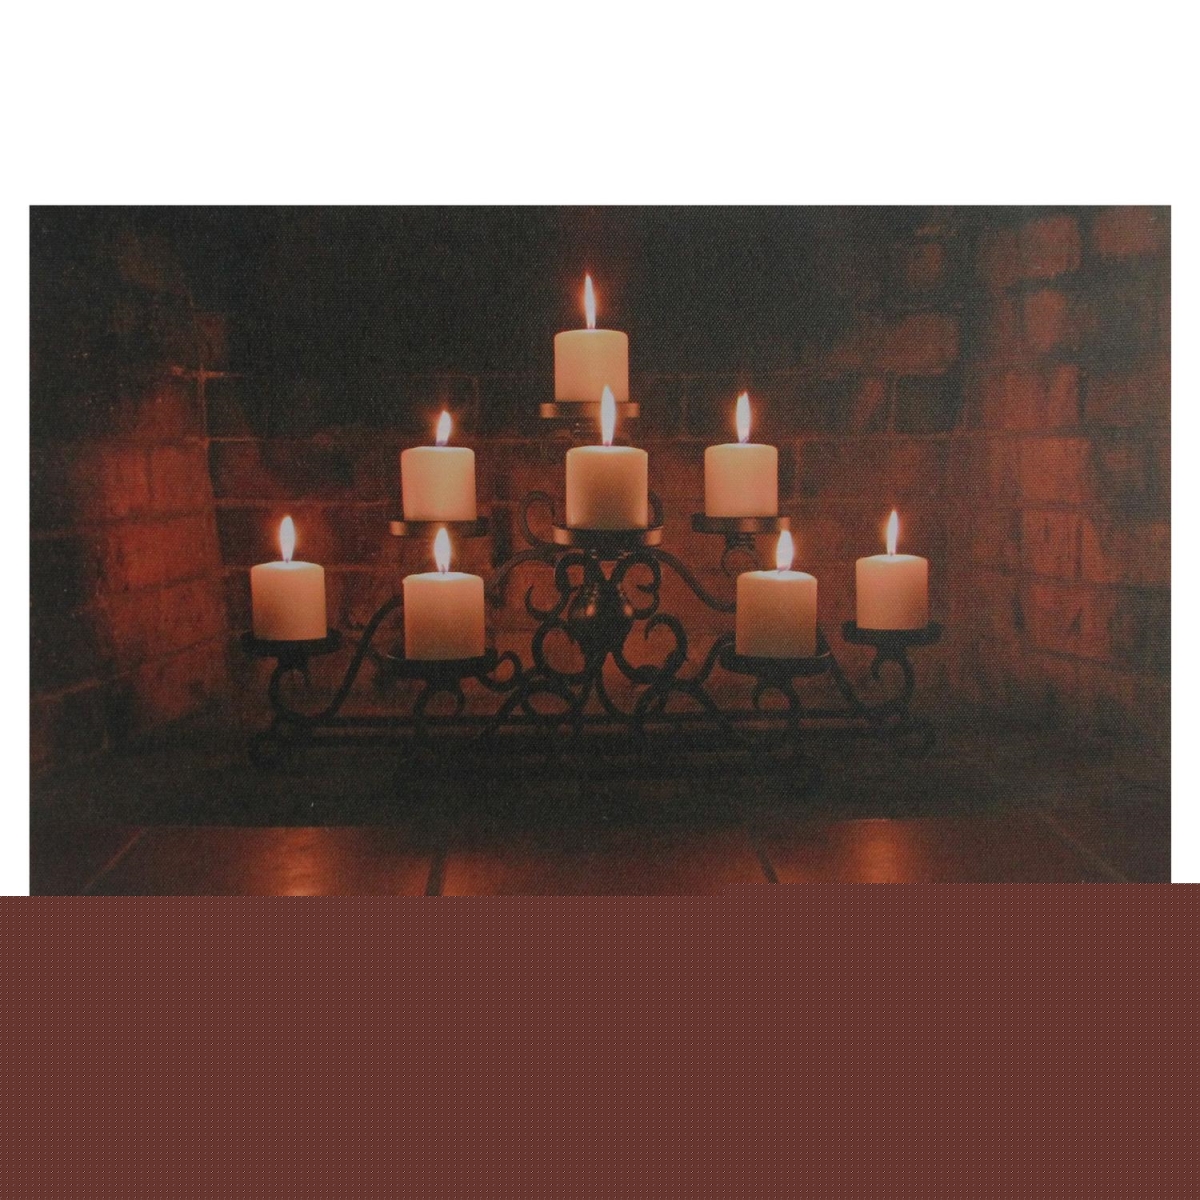 32621261 Flickering Candles In A Fireplace Canvas Wall Art